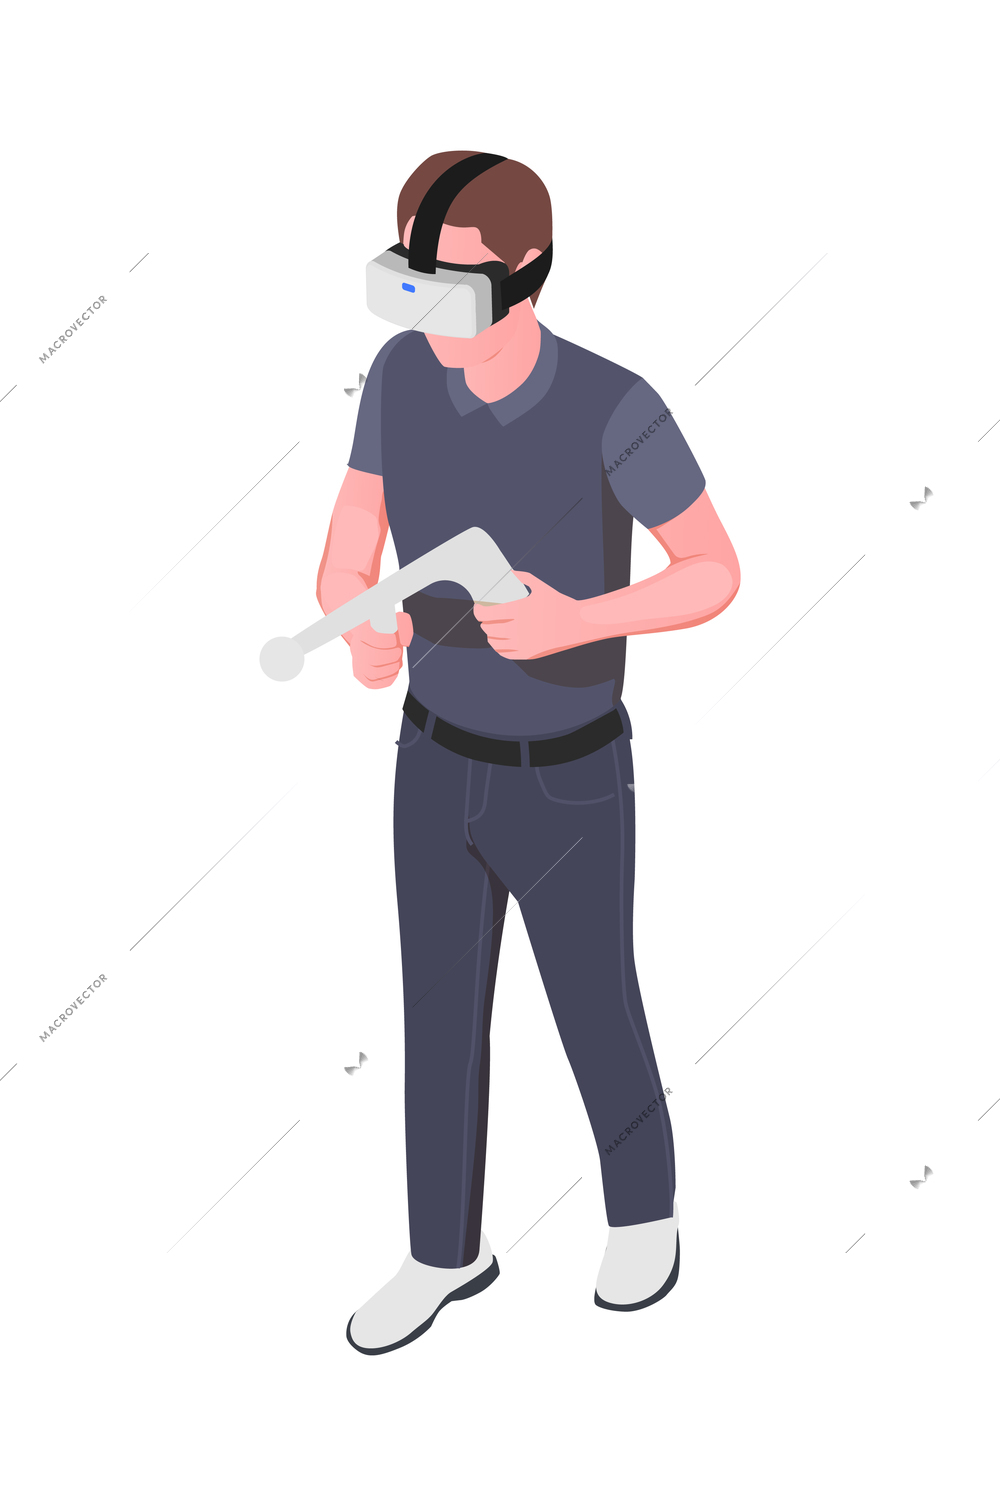 Virtual augmented reality isometric composition with male character in vr helmet holding toy gun vector illustration